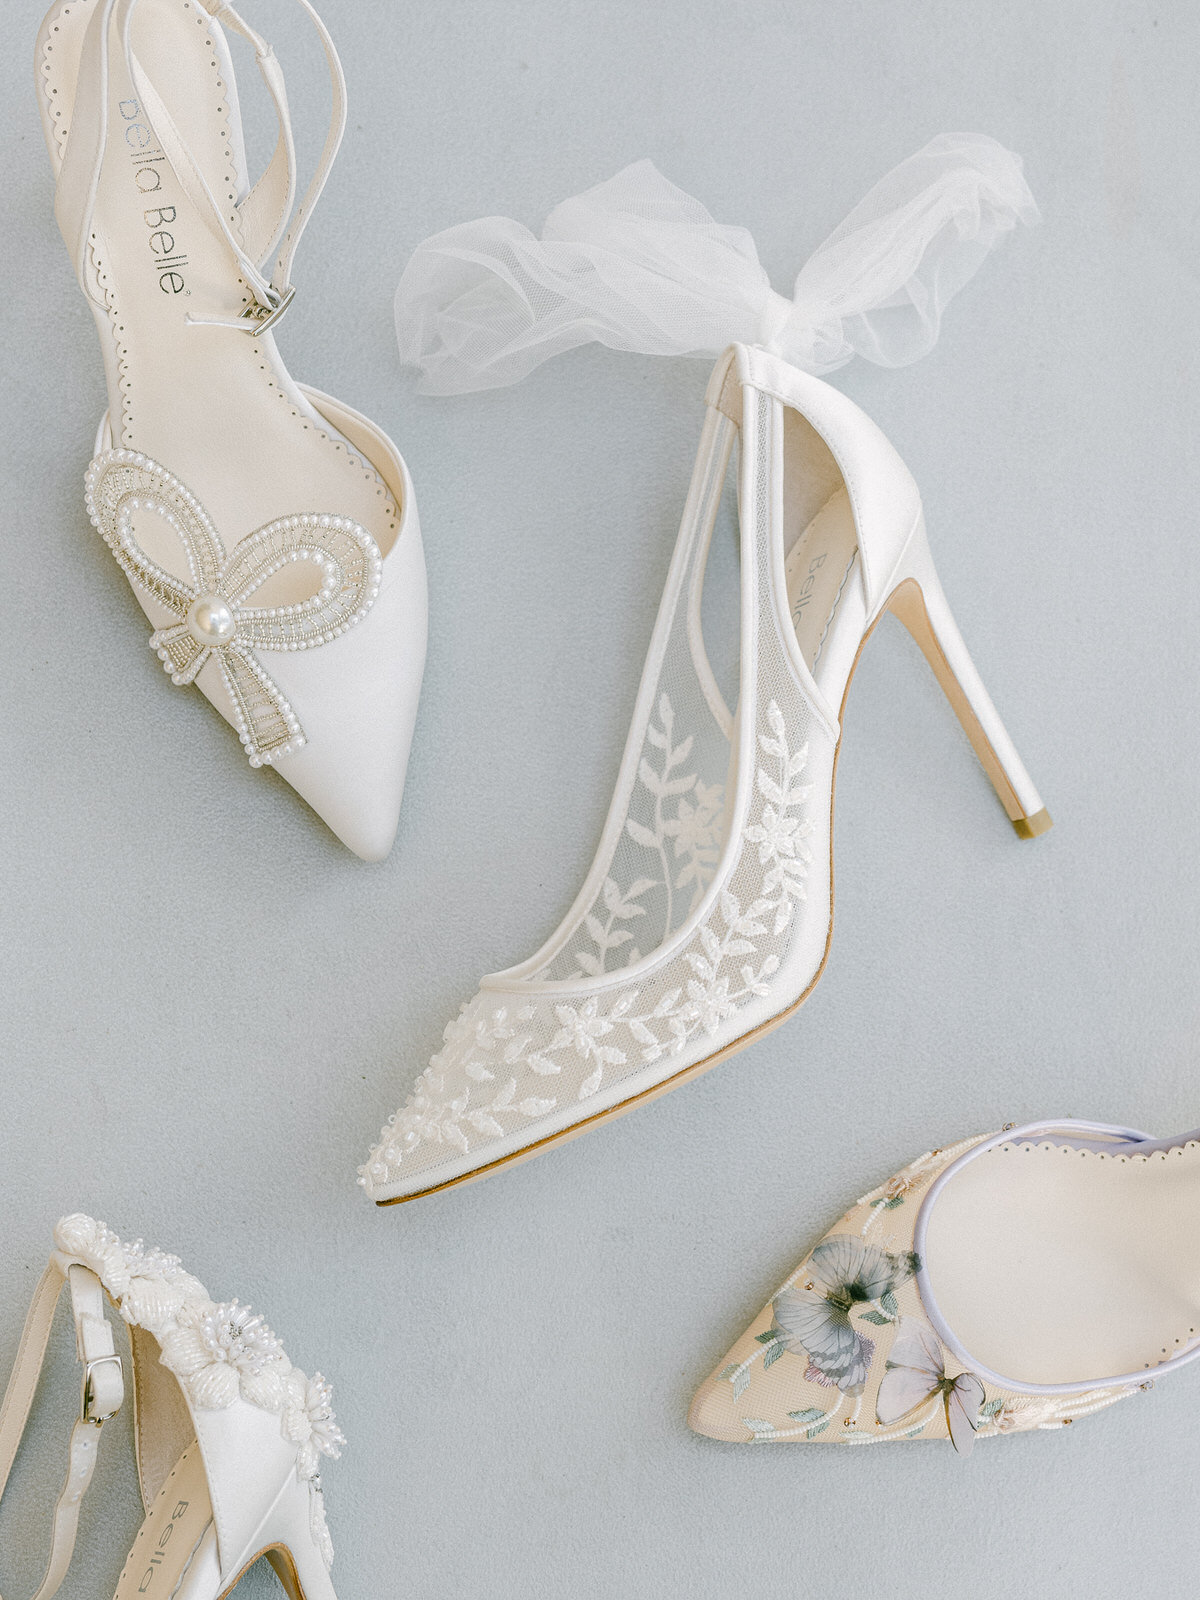 Bella Belle Shoes - Serenity Photography -17